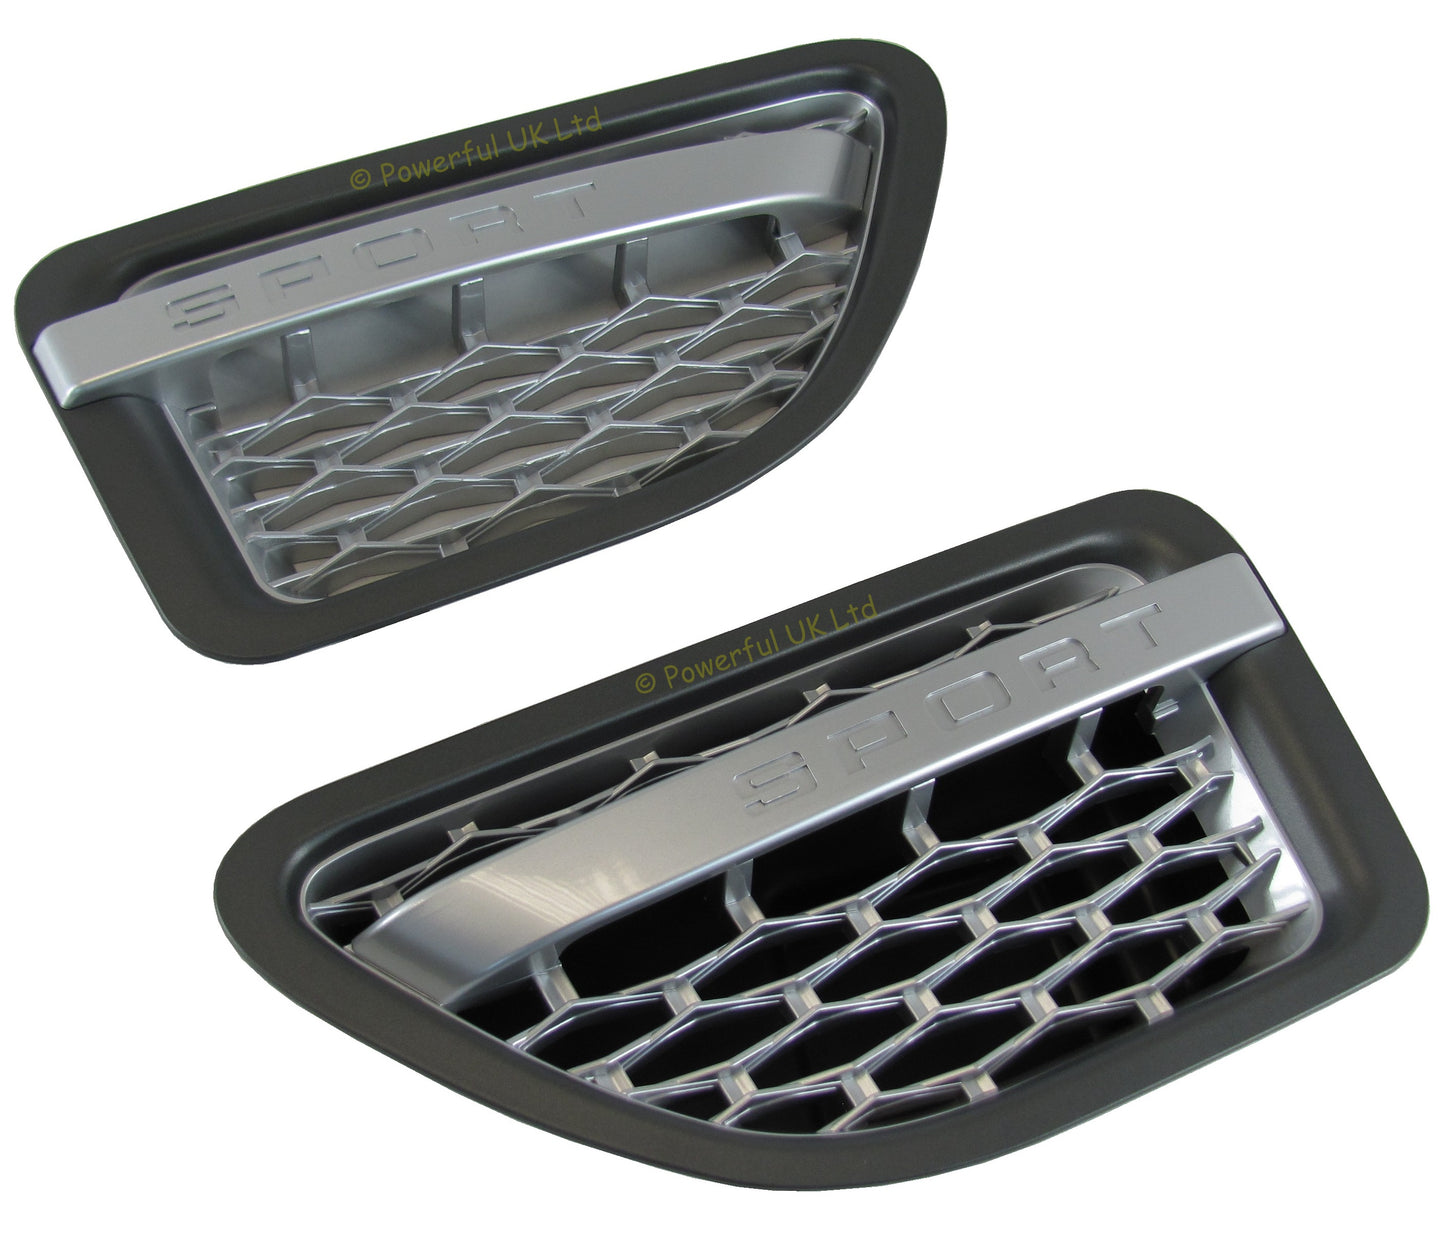 Side Vents - Grey/Silver/Silver for Range Rover Sport 2005